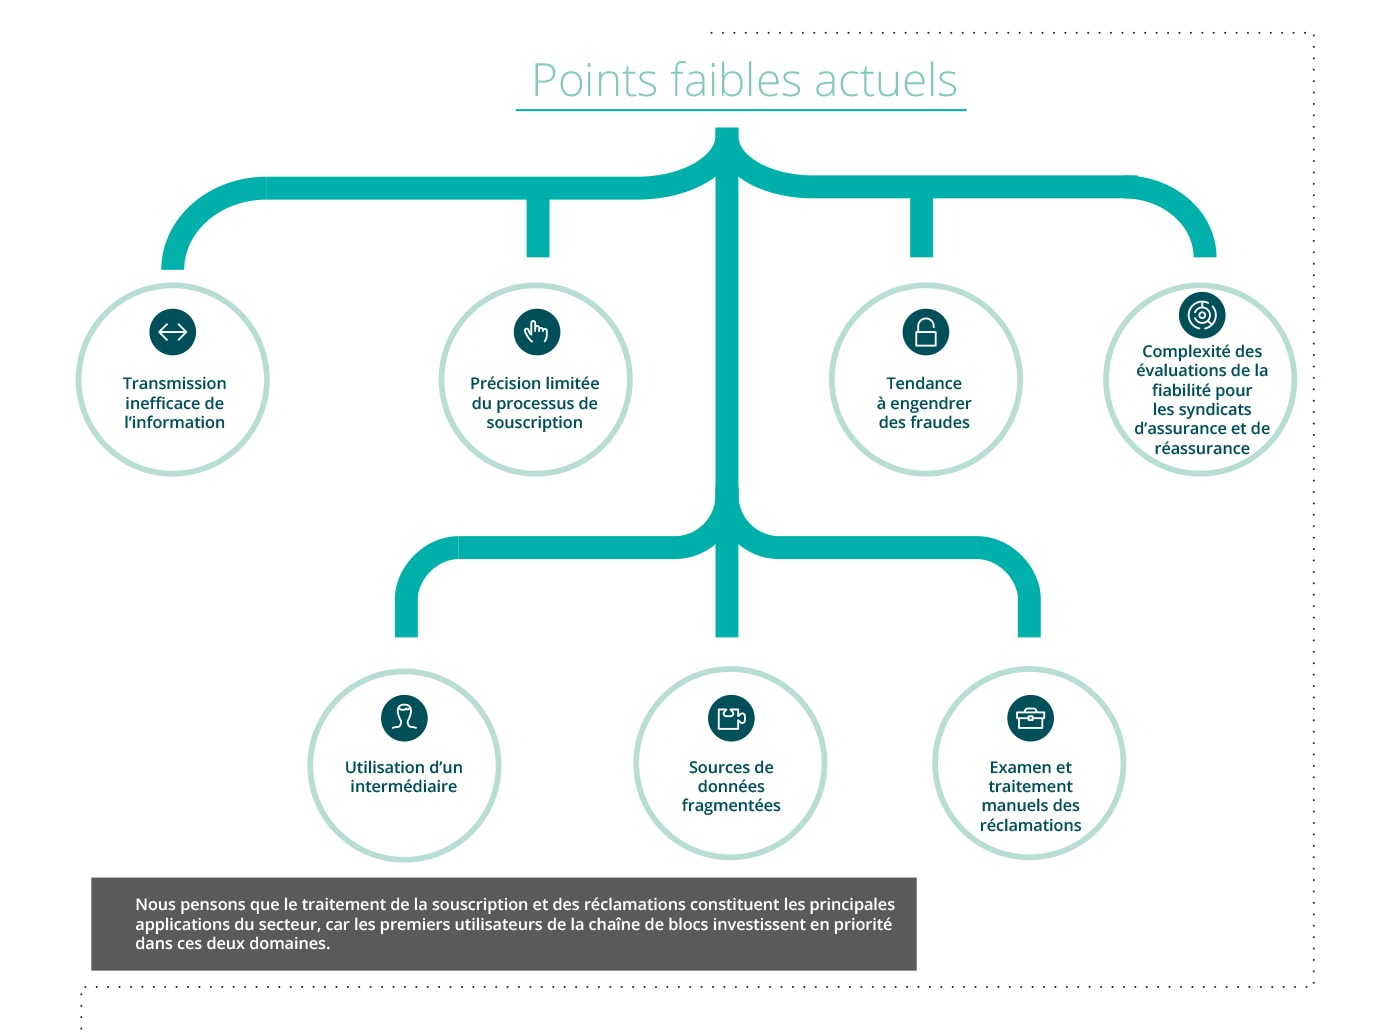 Points faibles actuels Transmission inefficace - infographic